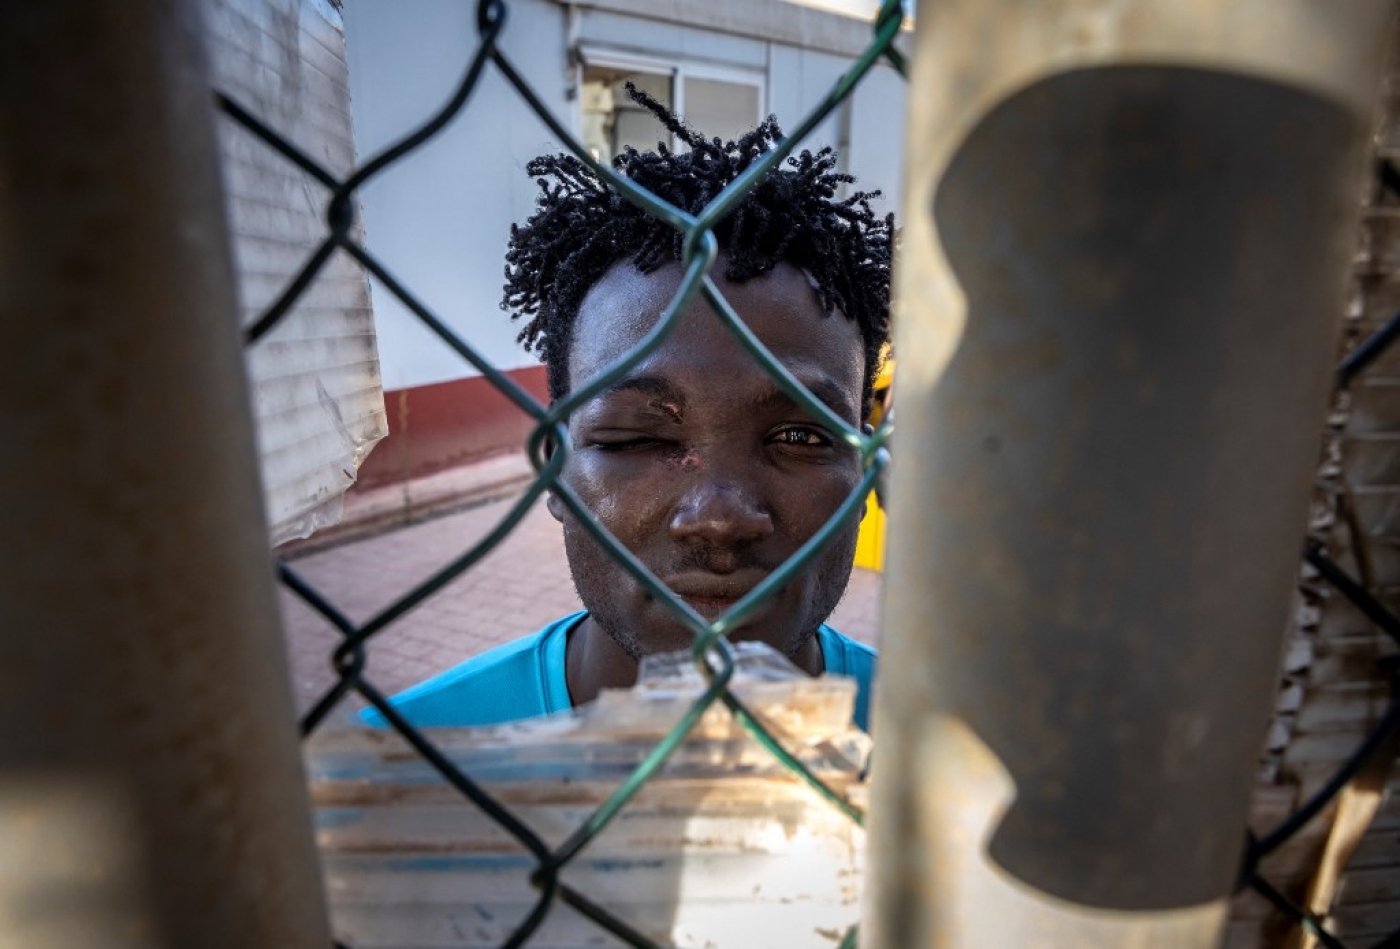 A Sudanese migrant looks through a fence in a temporary centre for migrants and asylum seekers on June 25, 2022 in Melilla (AFP)